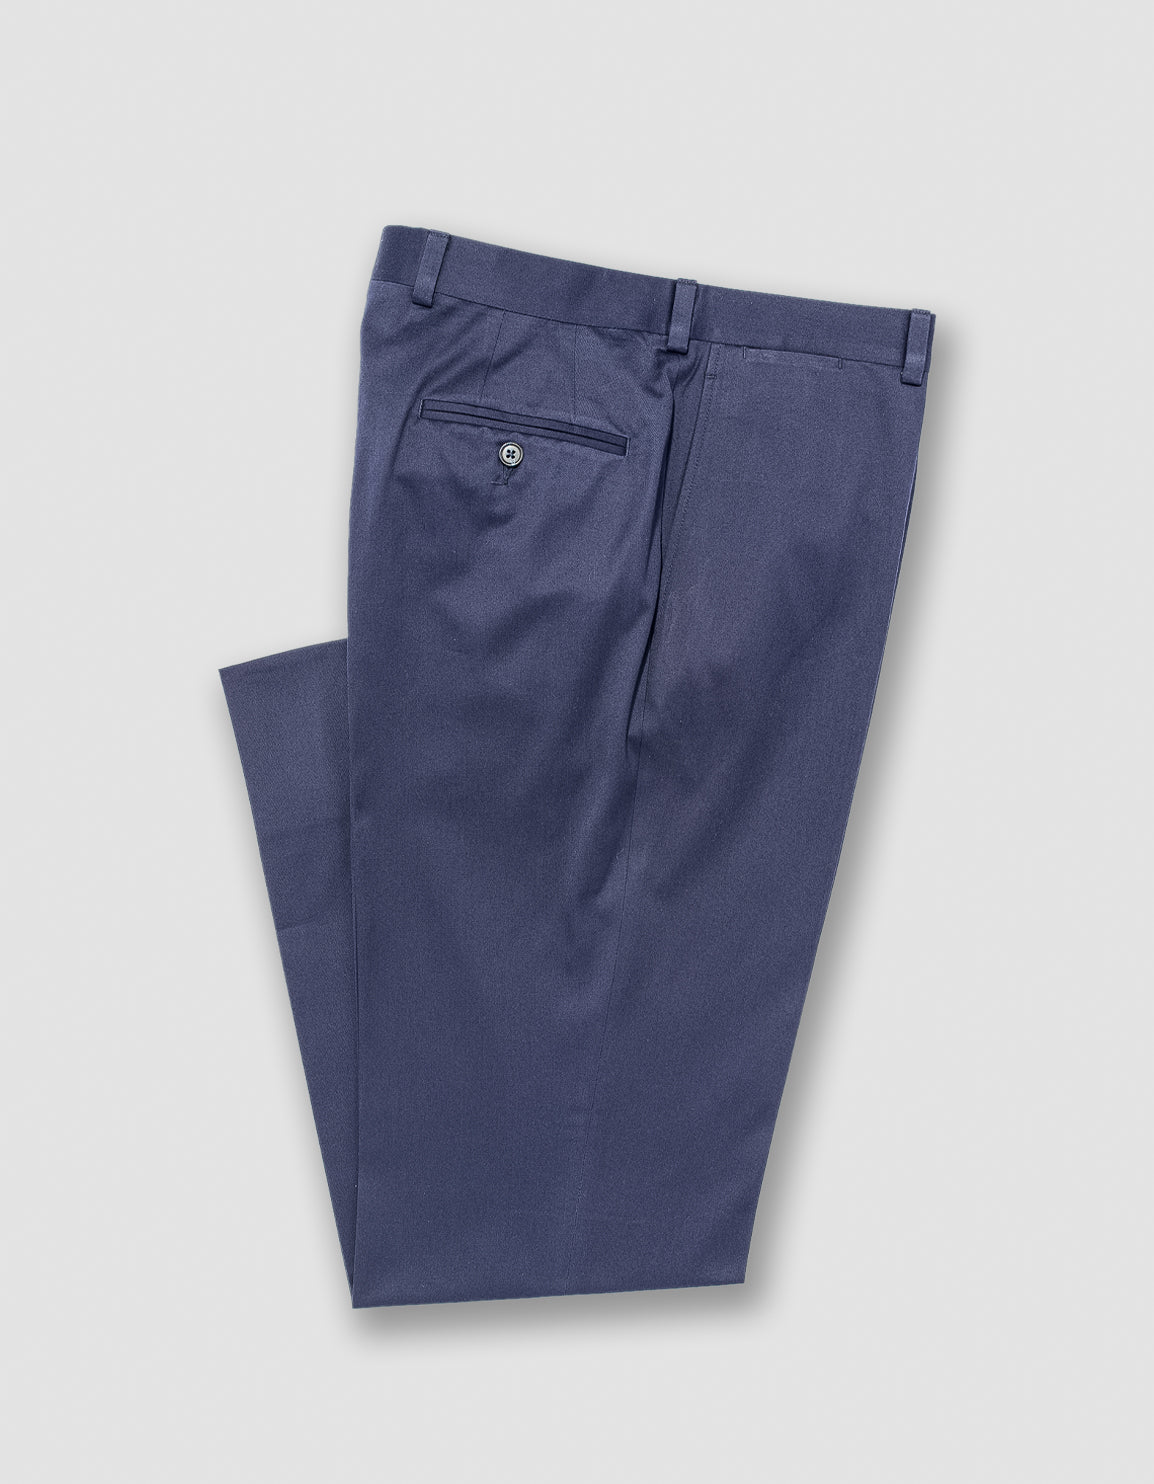 NAVY COTTON DRILL CLOTH TROUSER - CLASSIC FIT